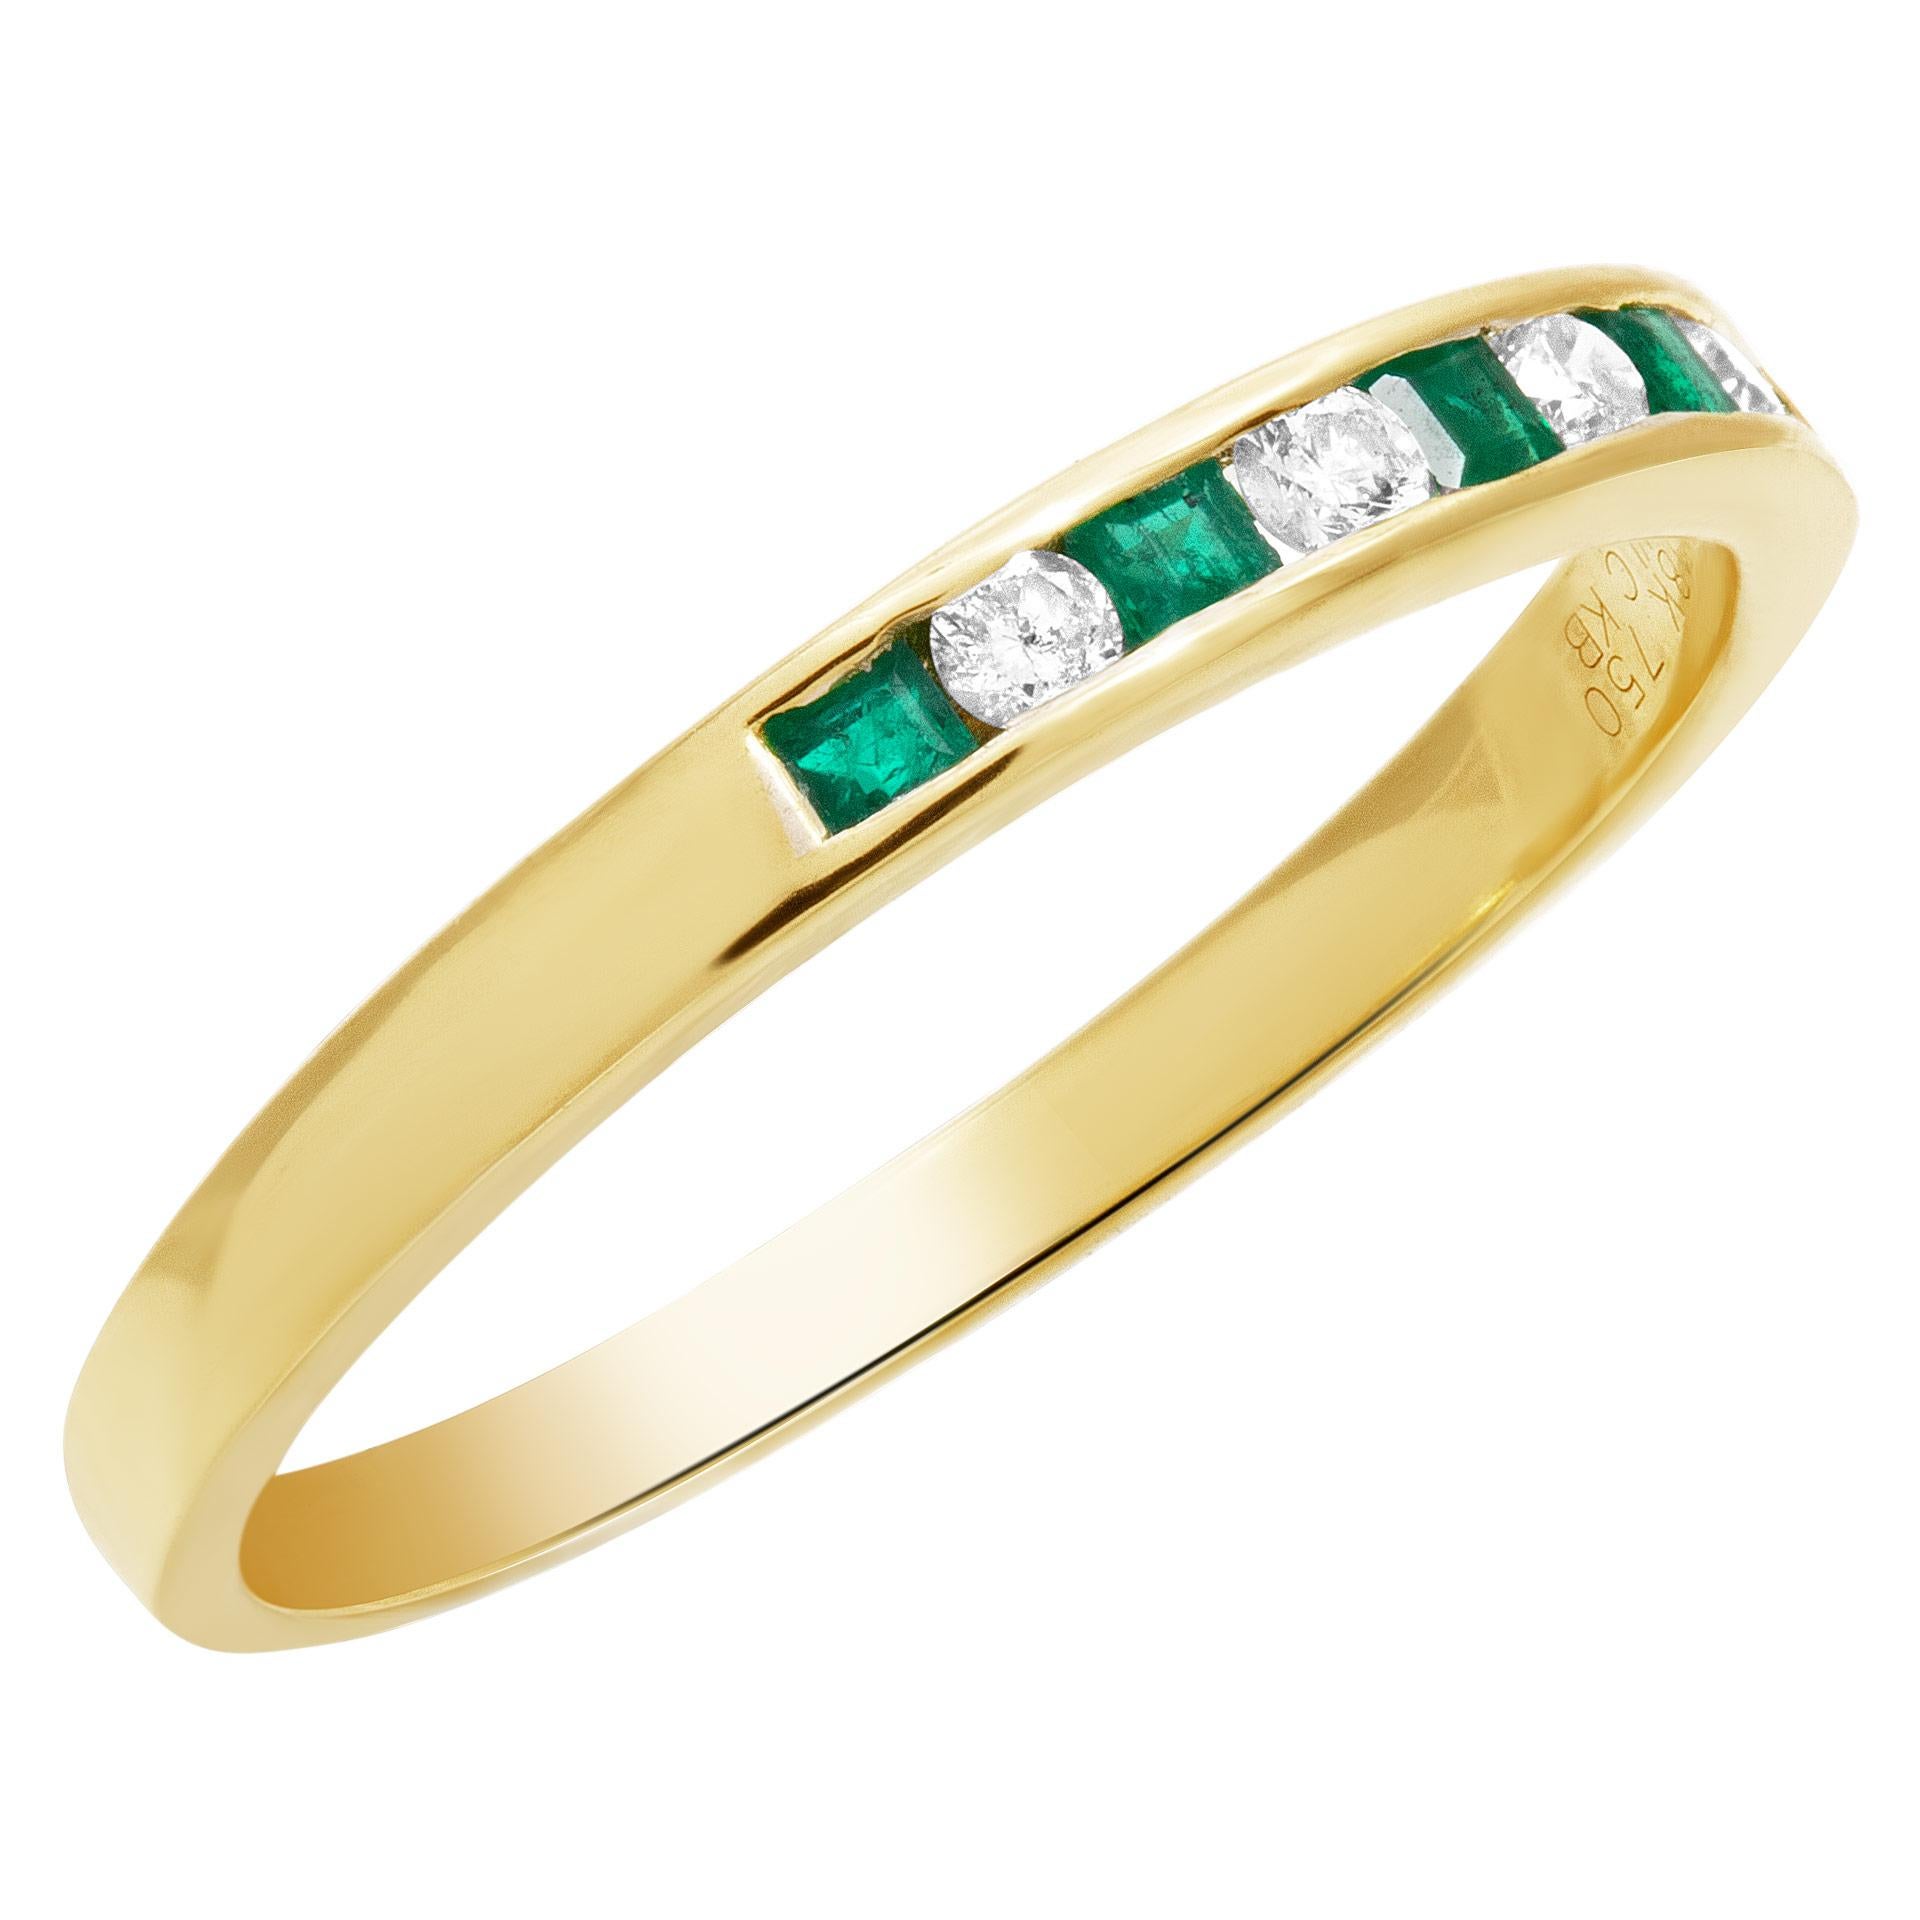 Emerald and diamond band in 18k gold. Size 7

This Diamond/Emerald ring is currently size 7 and some items can be sized up or down, please ask! It weighs 1.2 pennyweights and is 18k.